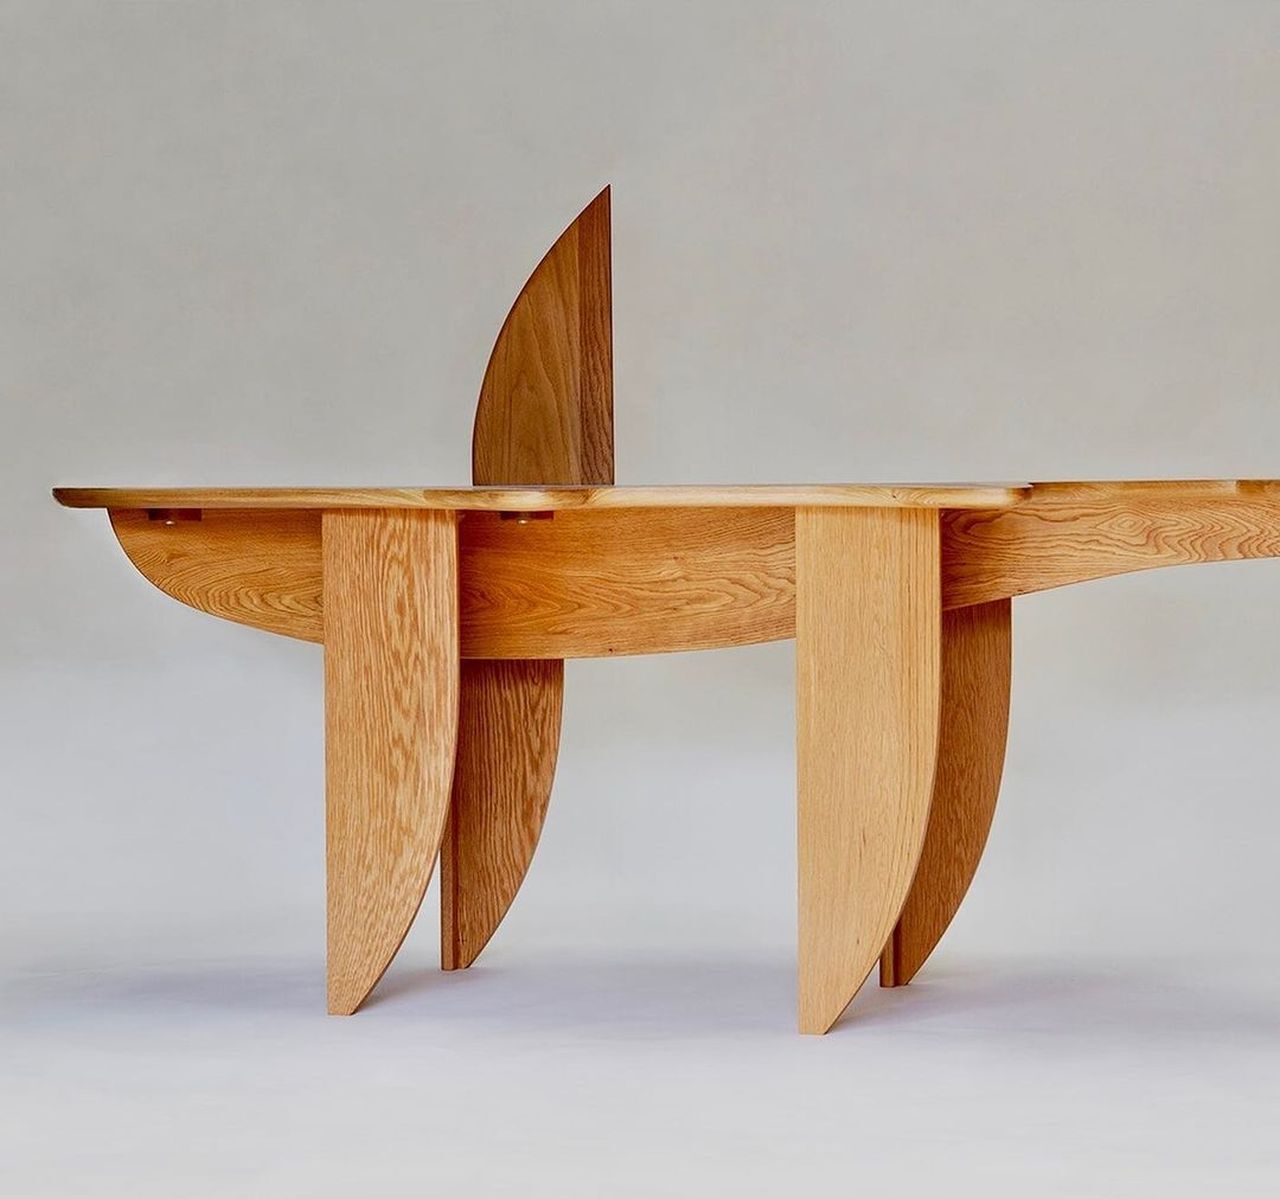 Tuna Fish Table by Japanese Designer-standing view